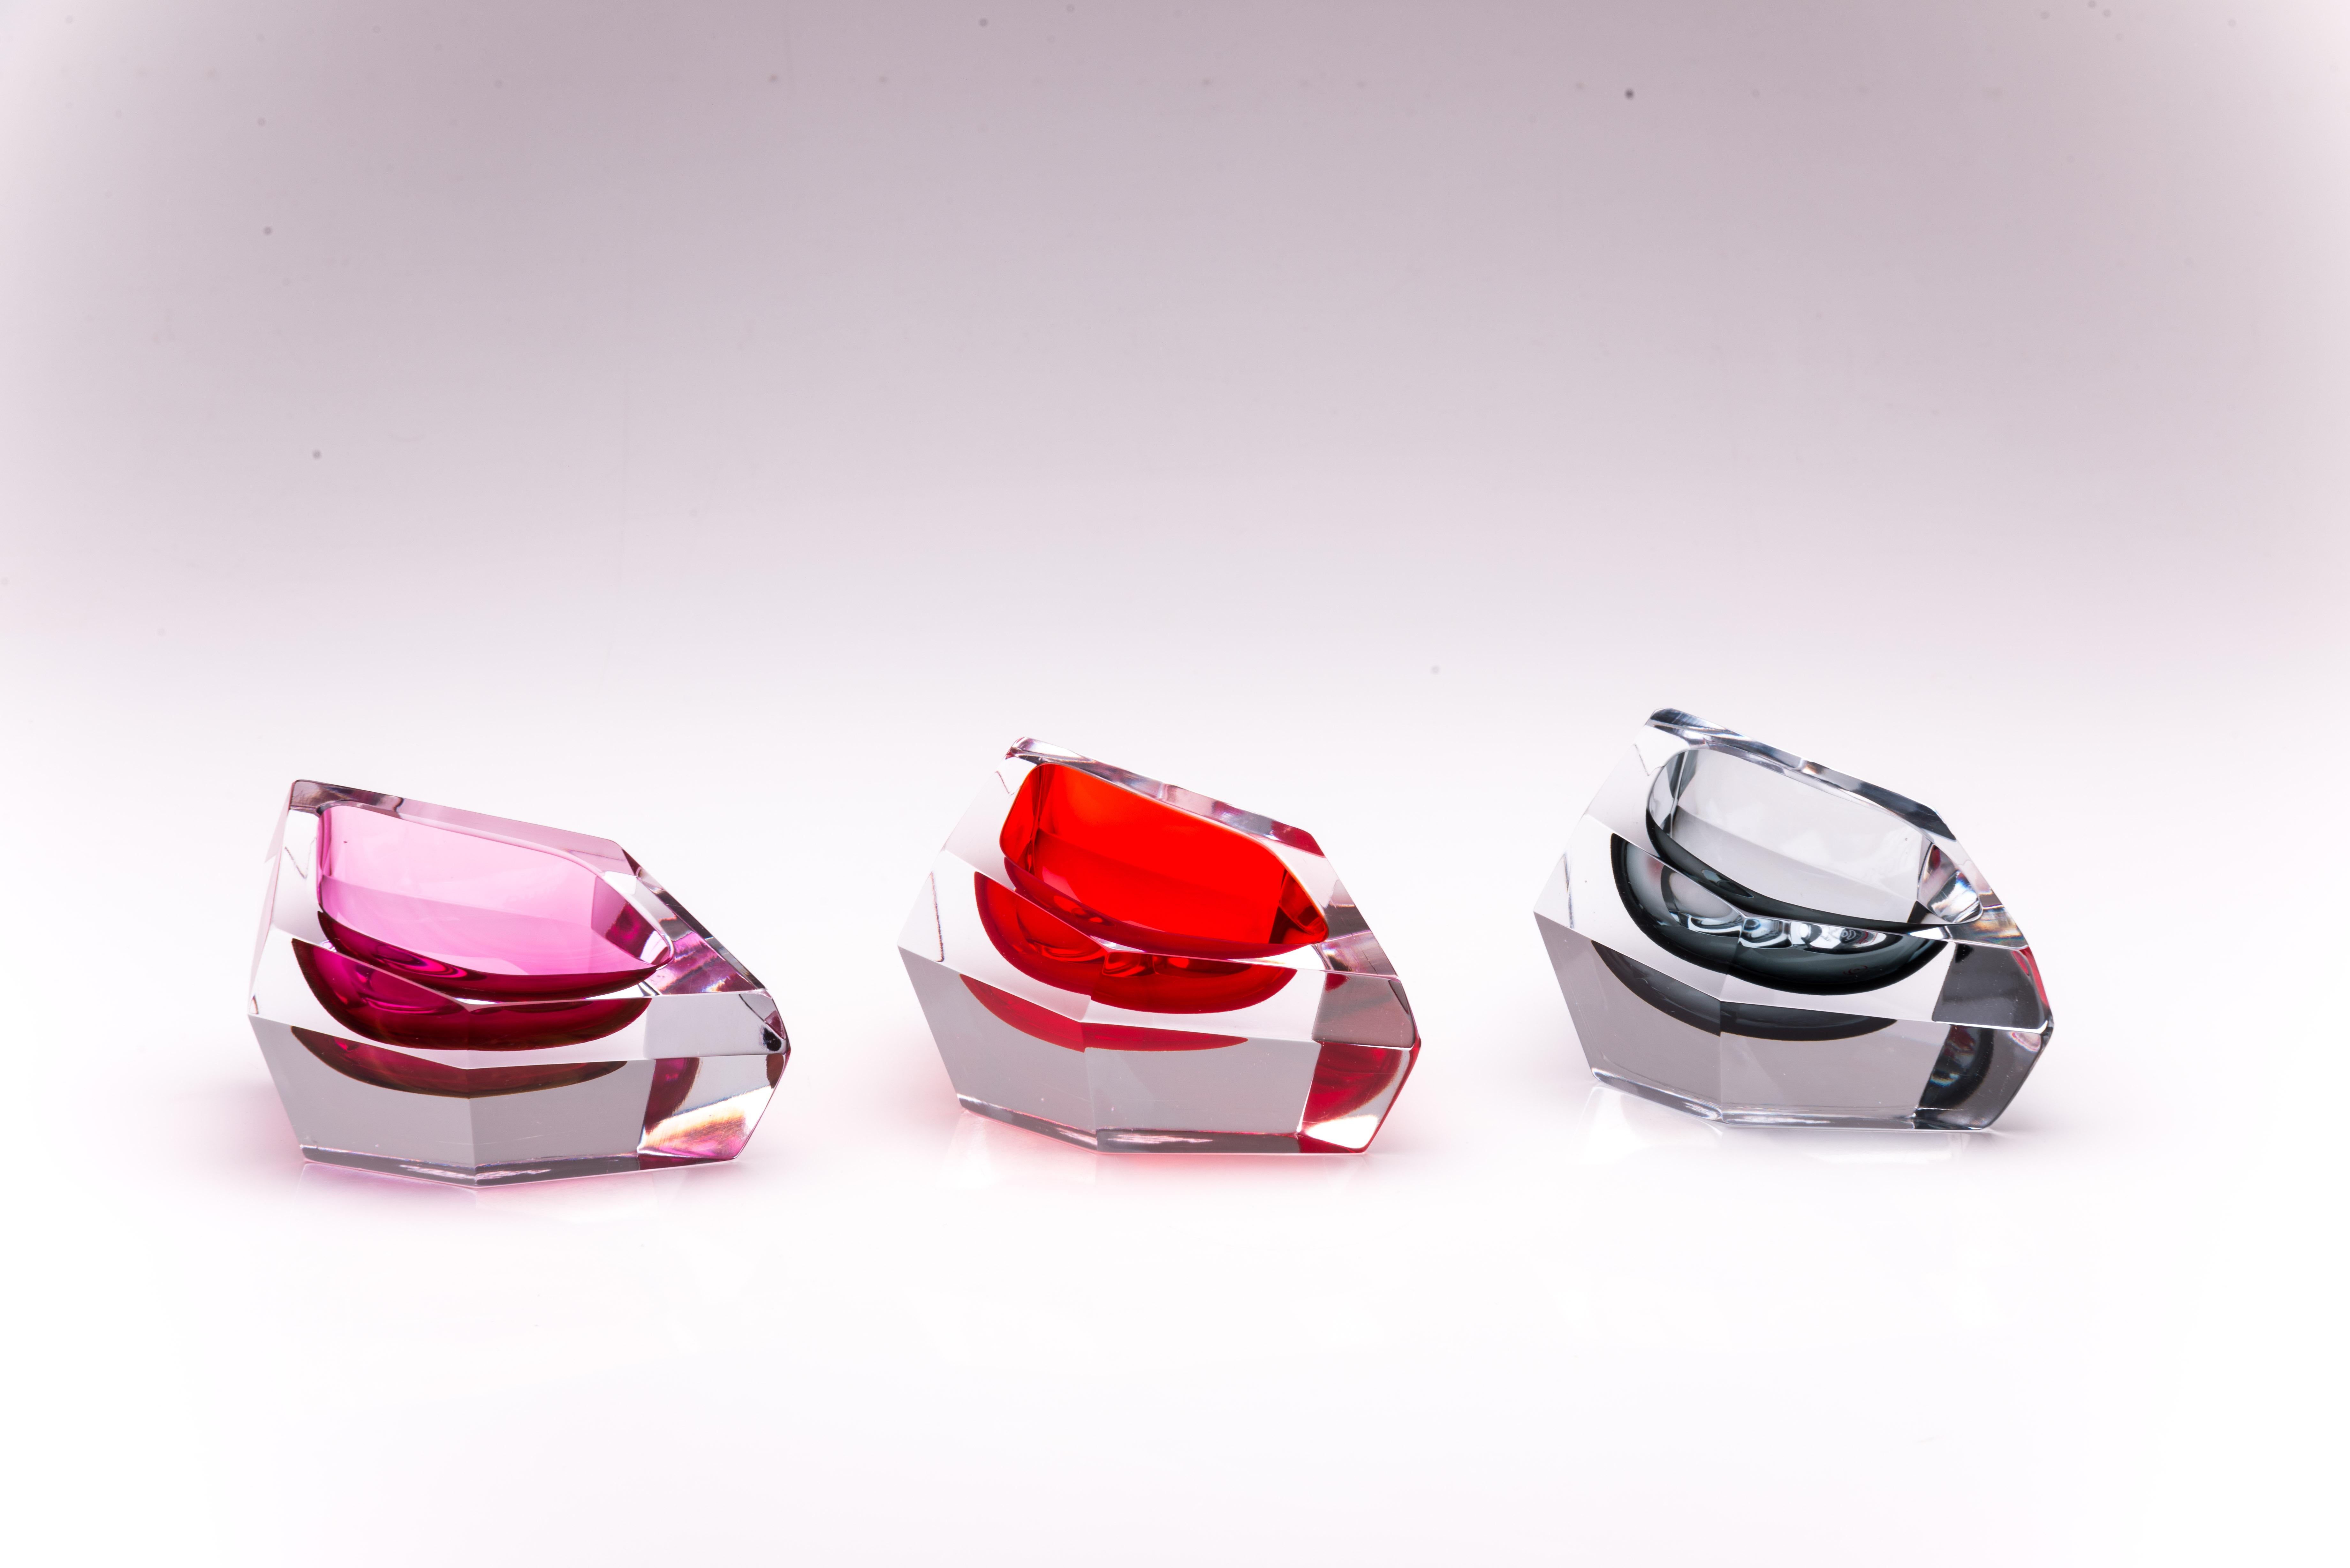 Set of 3 Kastle mini bowls by Purho
Dimensions: D 15 x W 11 x H 6cm
Materials: Glass.
Other colours and dimensions are available.

Purho is a new protagonist of made in Italy design, a work of synthesis, a research that has lasted for years, an